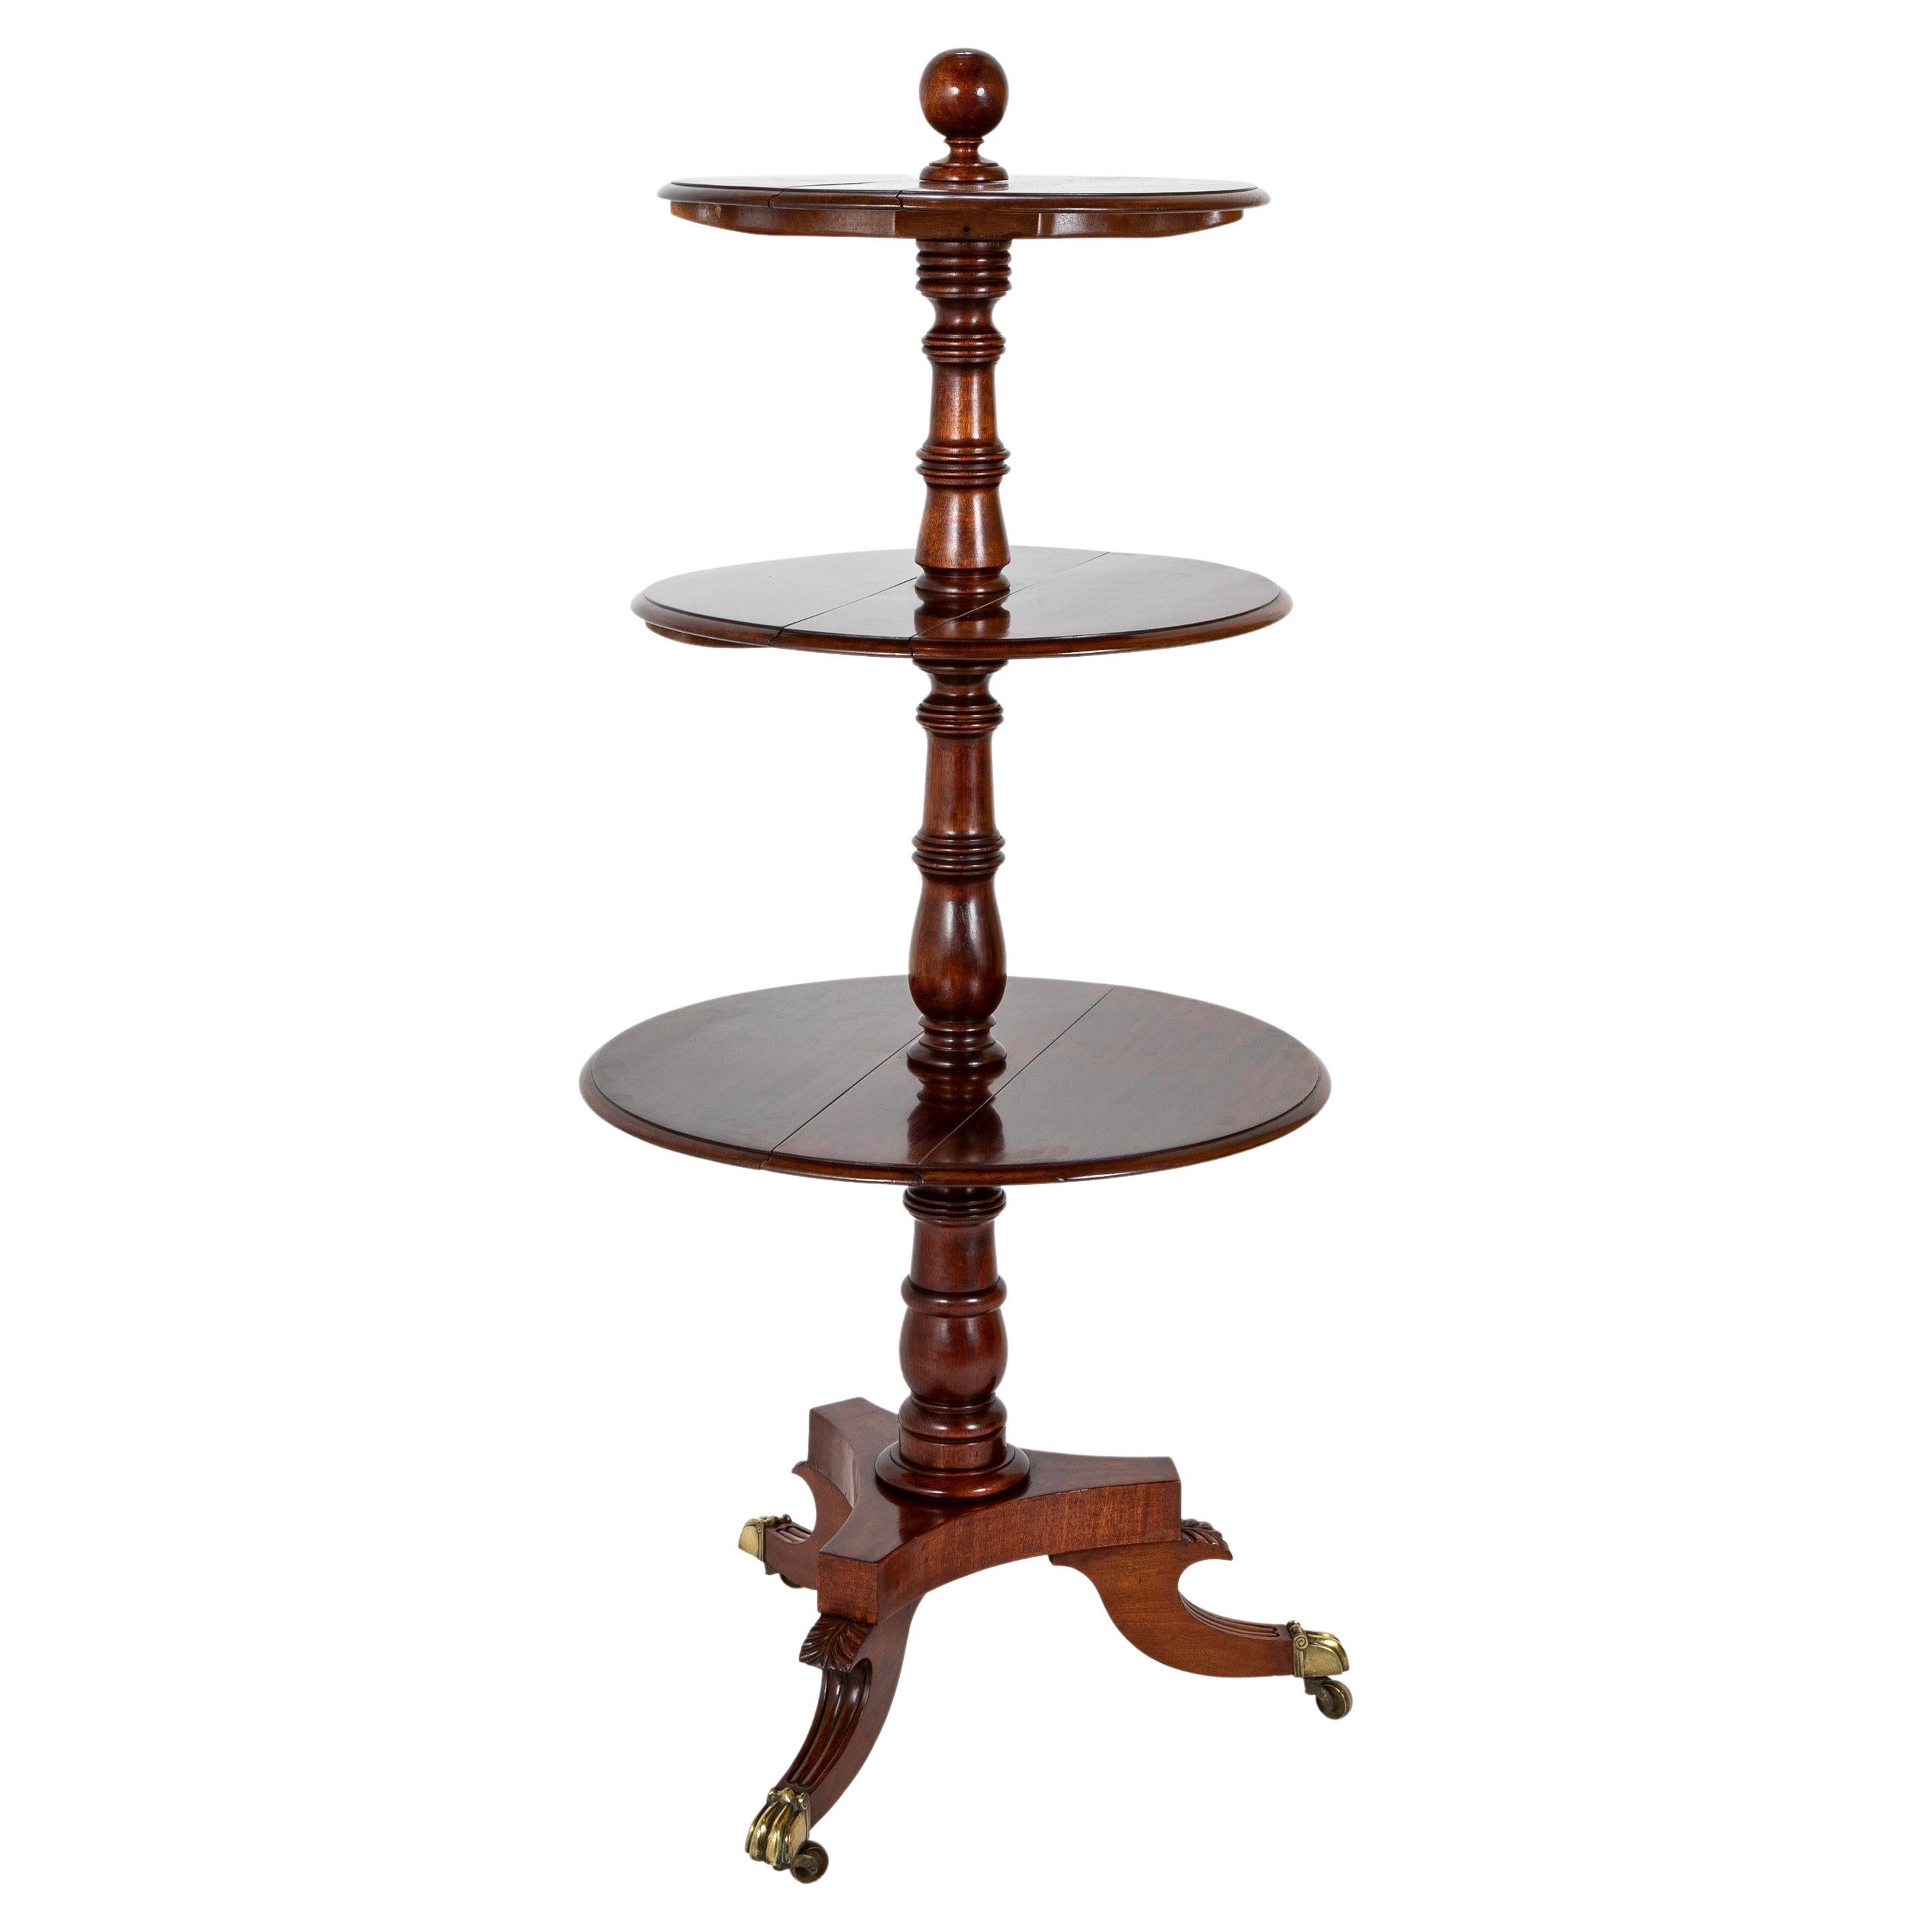 A lovely 19th century English Regency mahogany three tiered etagere or dumbwaiter with three circular shelves that fold. The central turned support resting on a tripod base of three elegant legs with acanthus leaf carving ending in the original paw